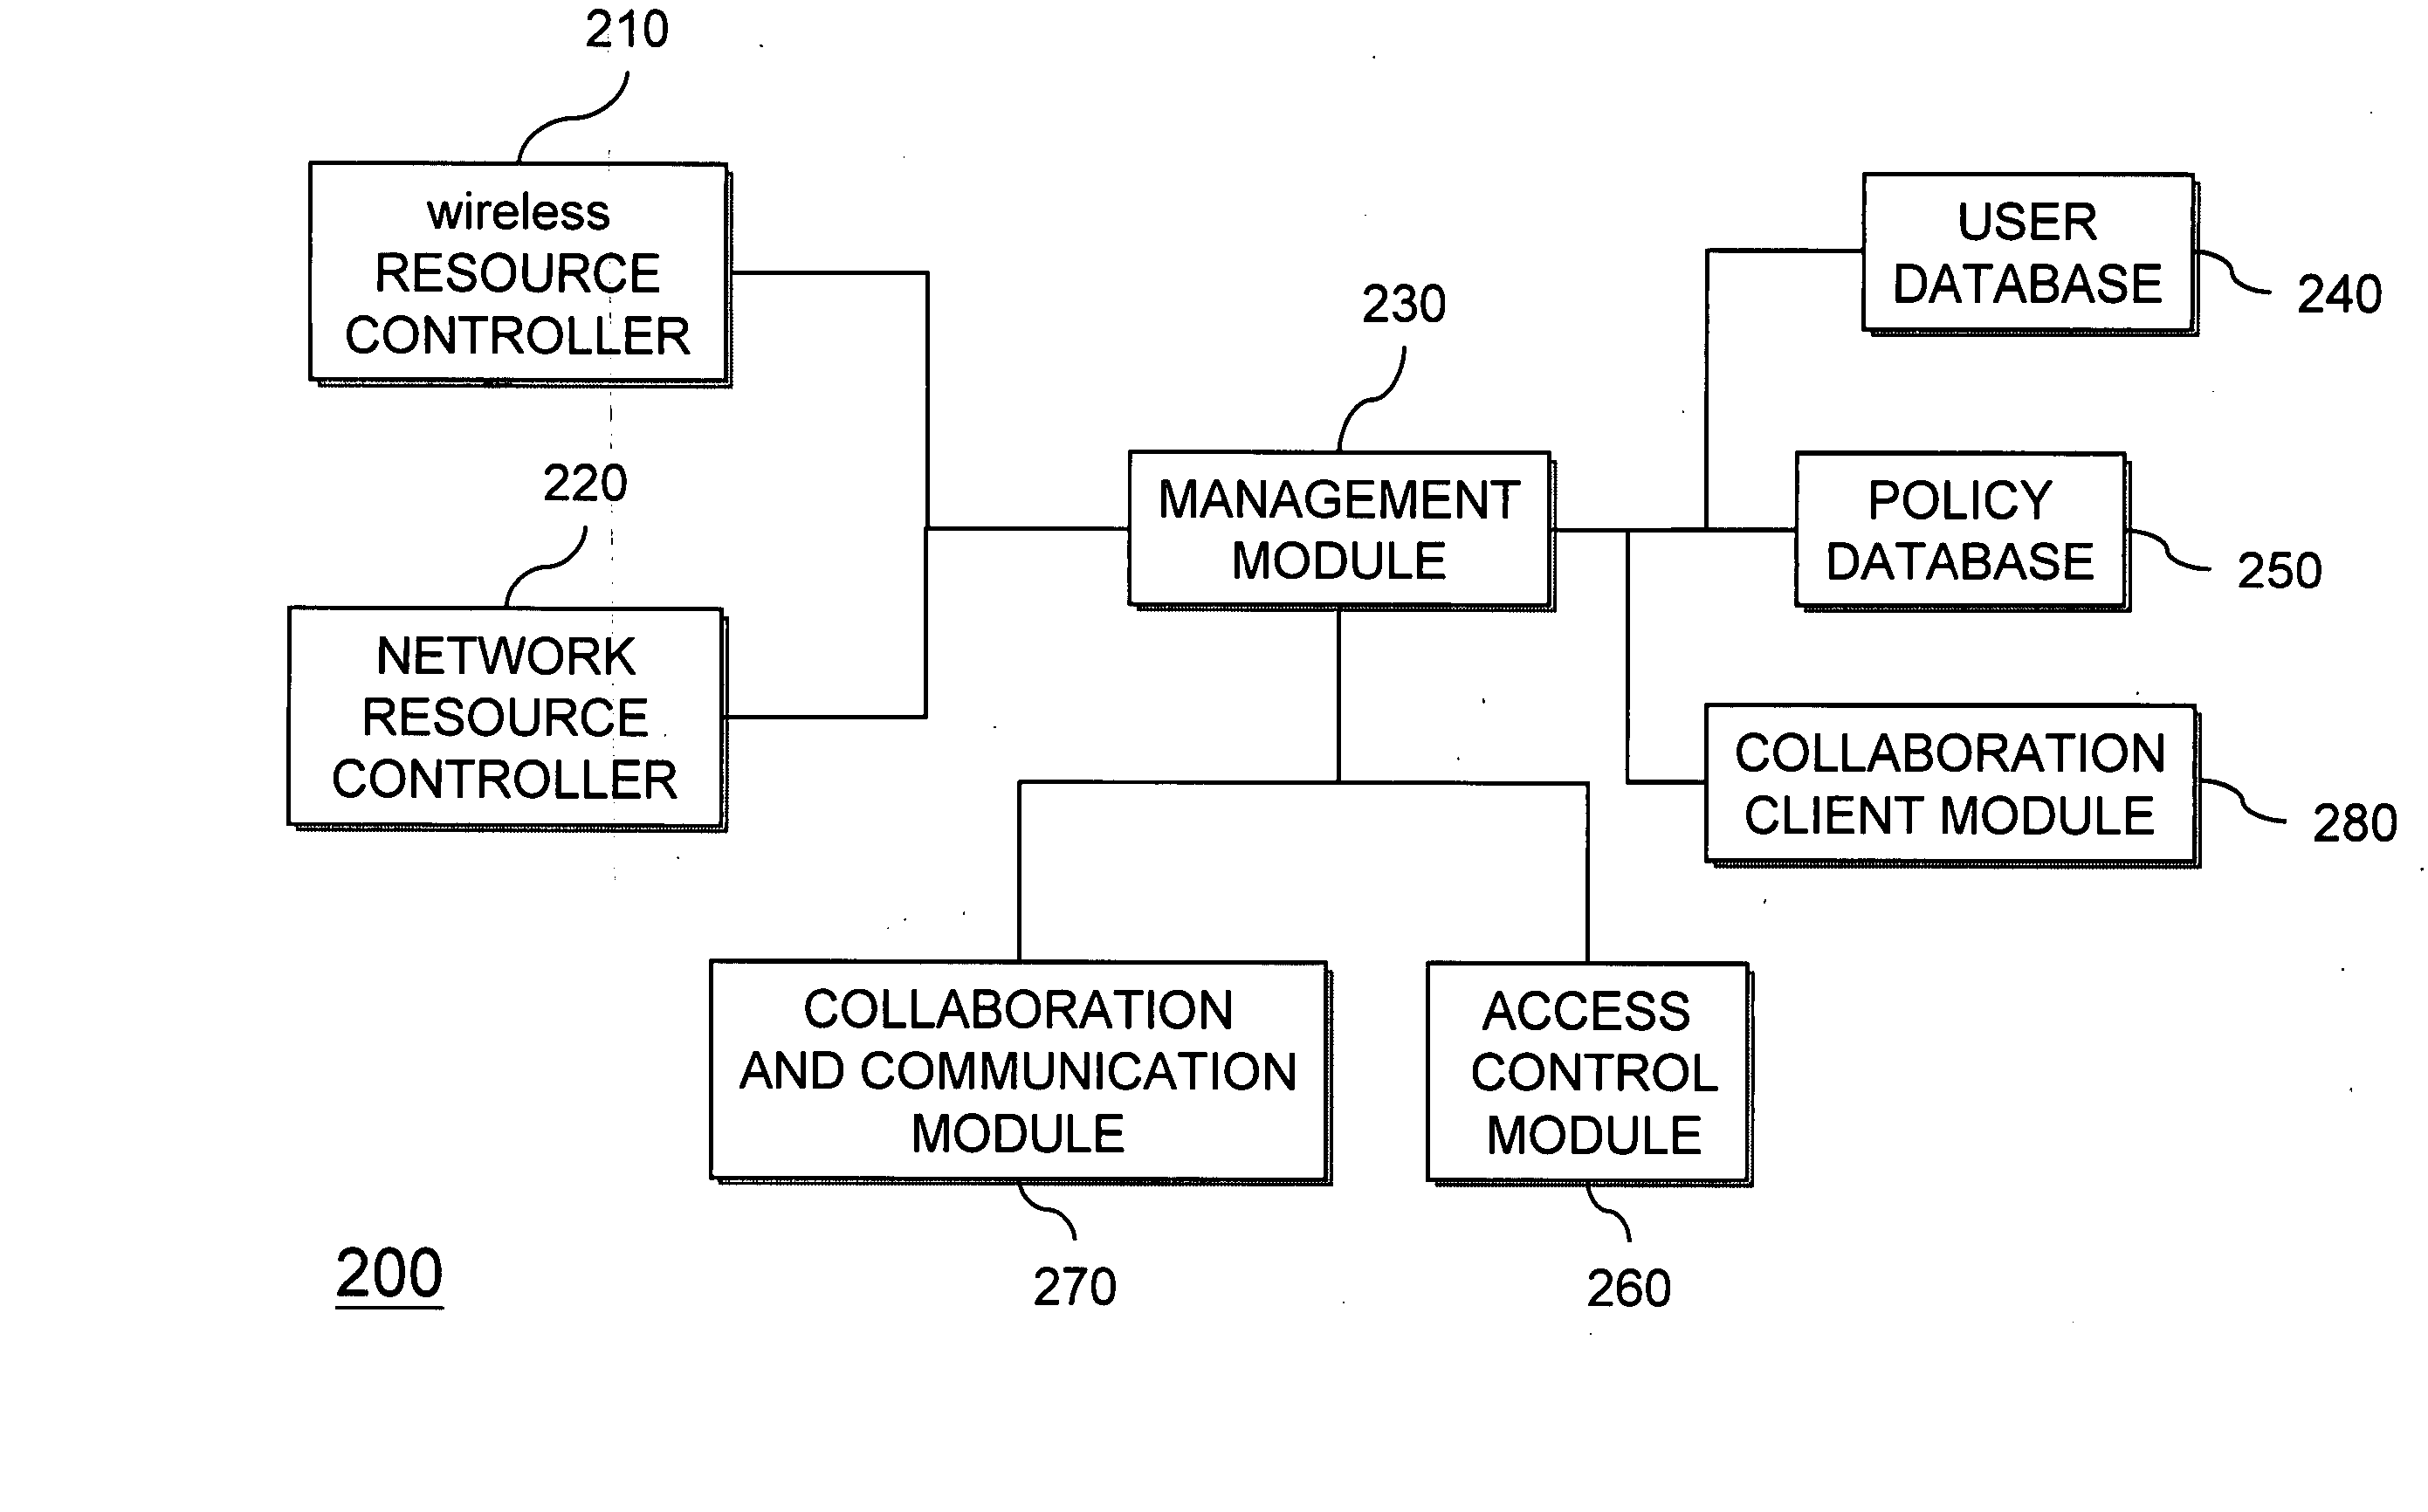 Mobile collaboration and communication system